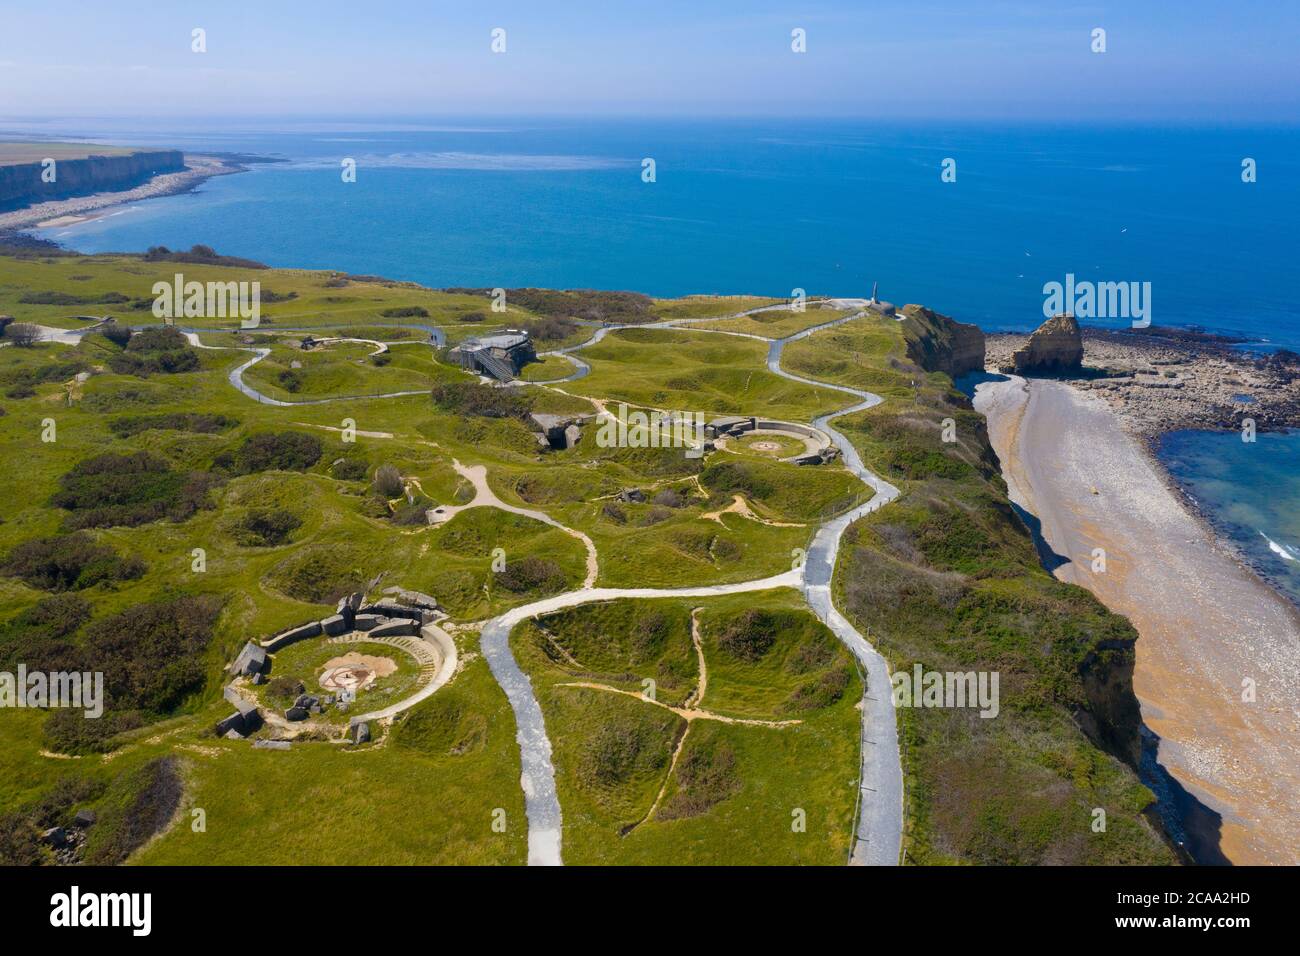 Aerial view of Pointe du Hoc on the coast of Normandy. famous World War II site Stock Photo